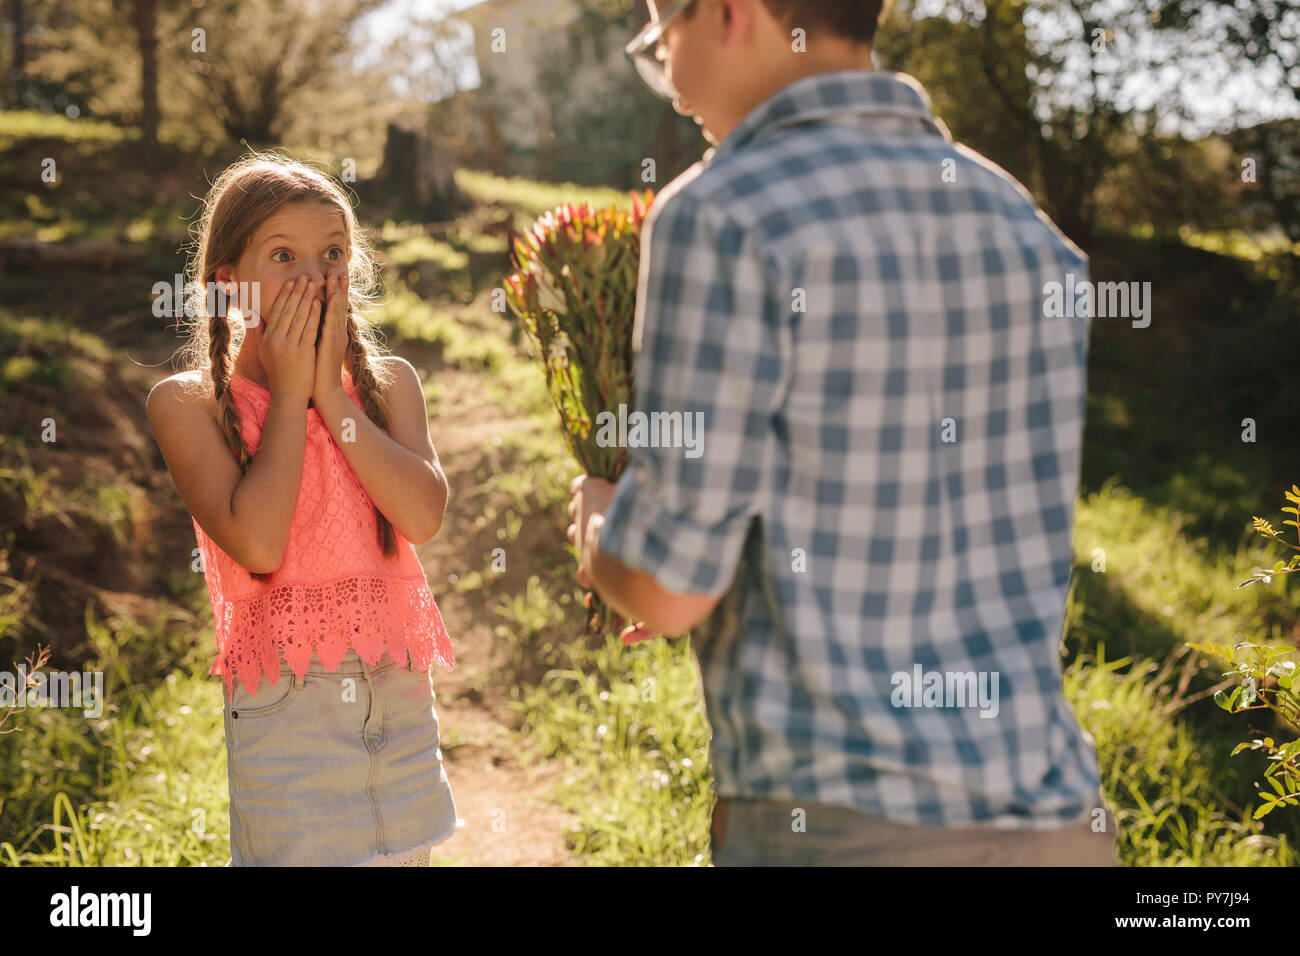 Young boy proposing to a girl with a bouquet of flowers standing ...